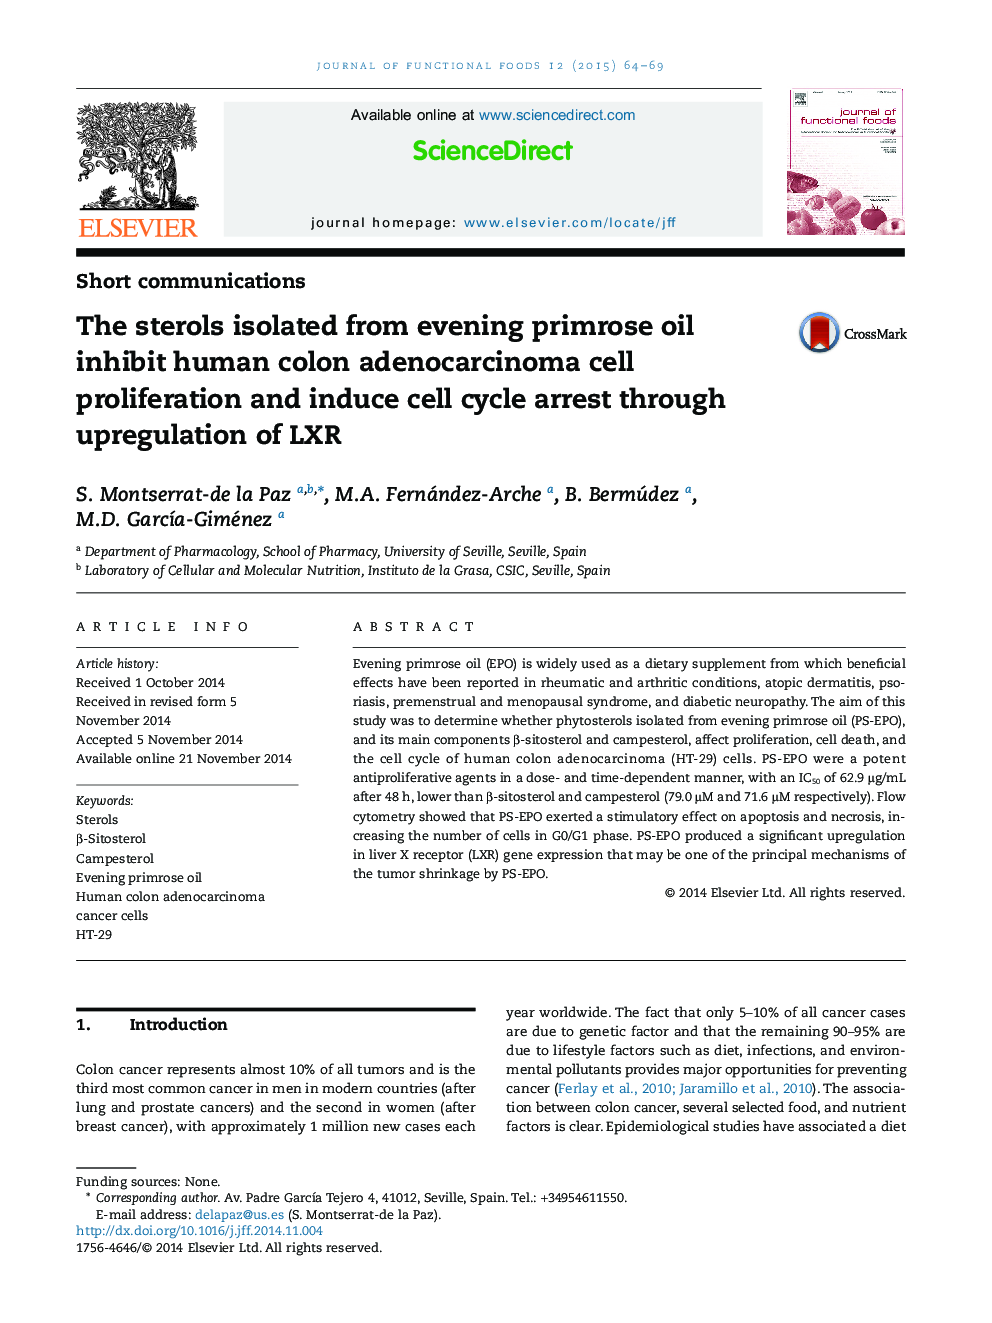 The sterols isolated from evening primrose oil inhibit human colon adenocarcinoma cell proliferation and induce cell cycle arrest through upregulation of LXR 